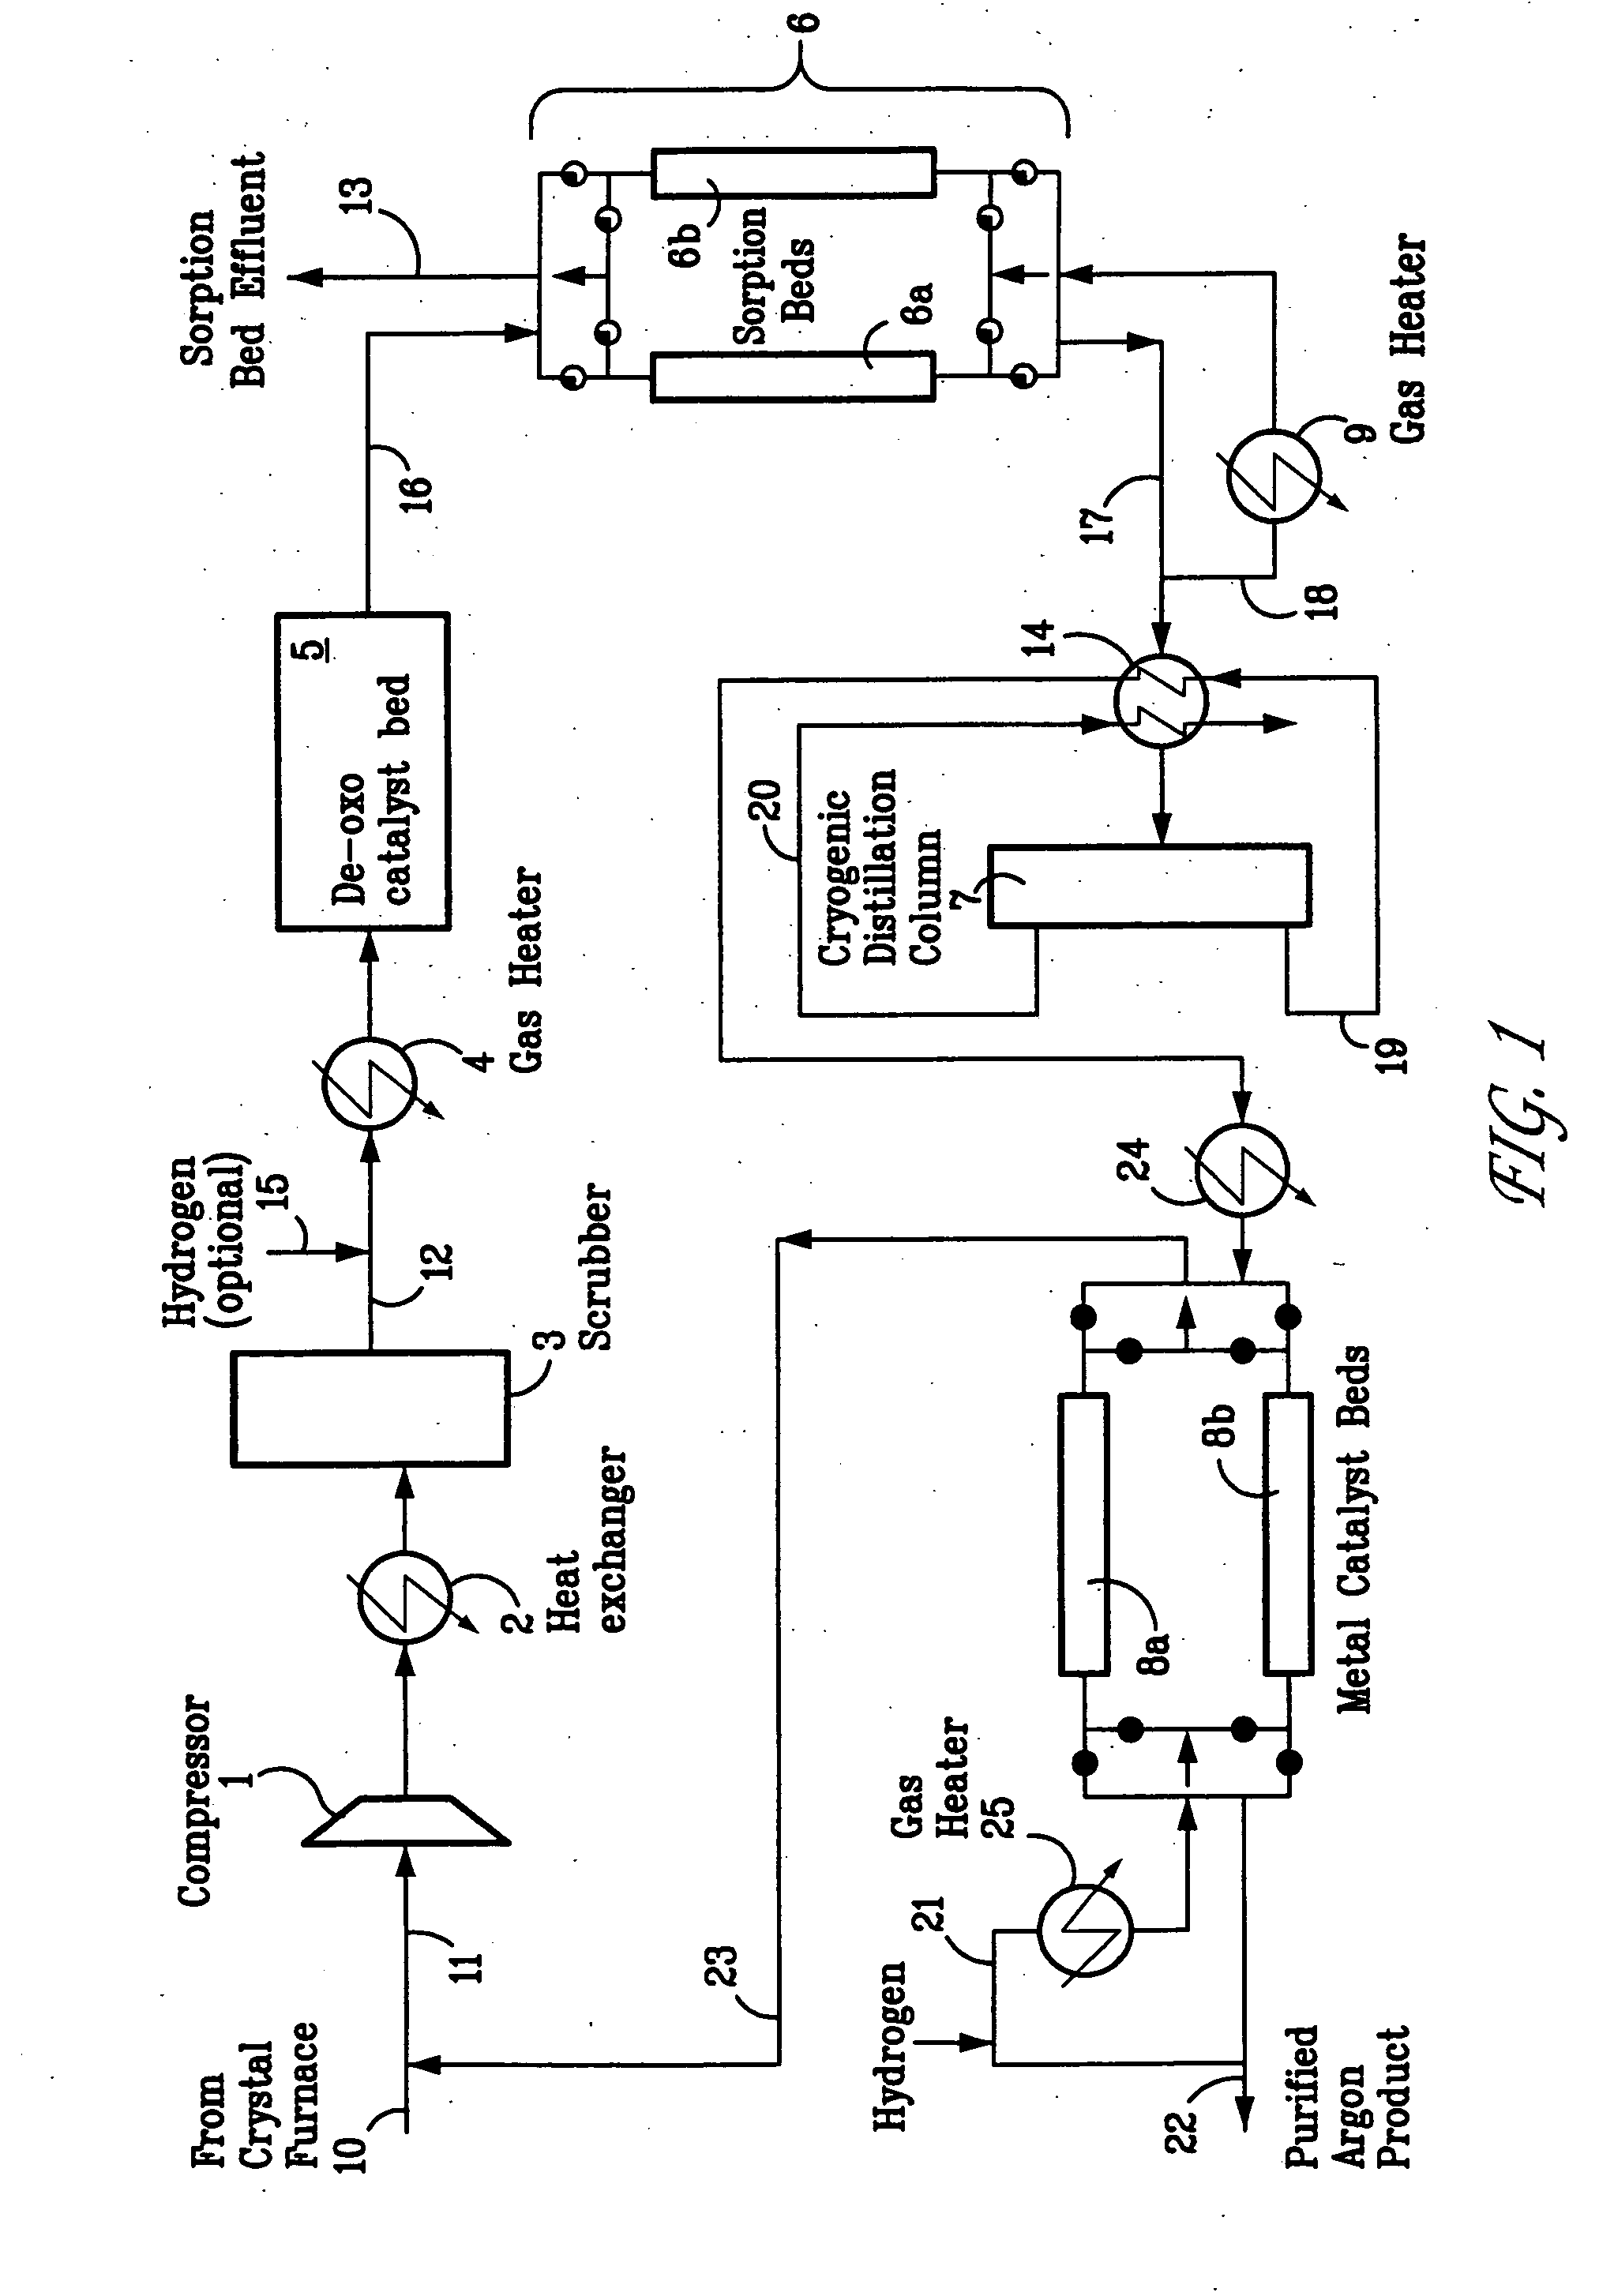 Process for recovery, purification, and recycle of argon